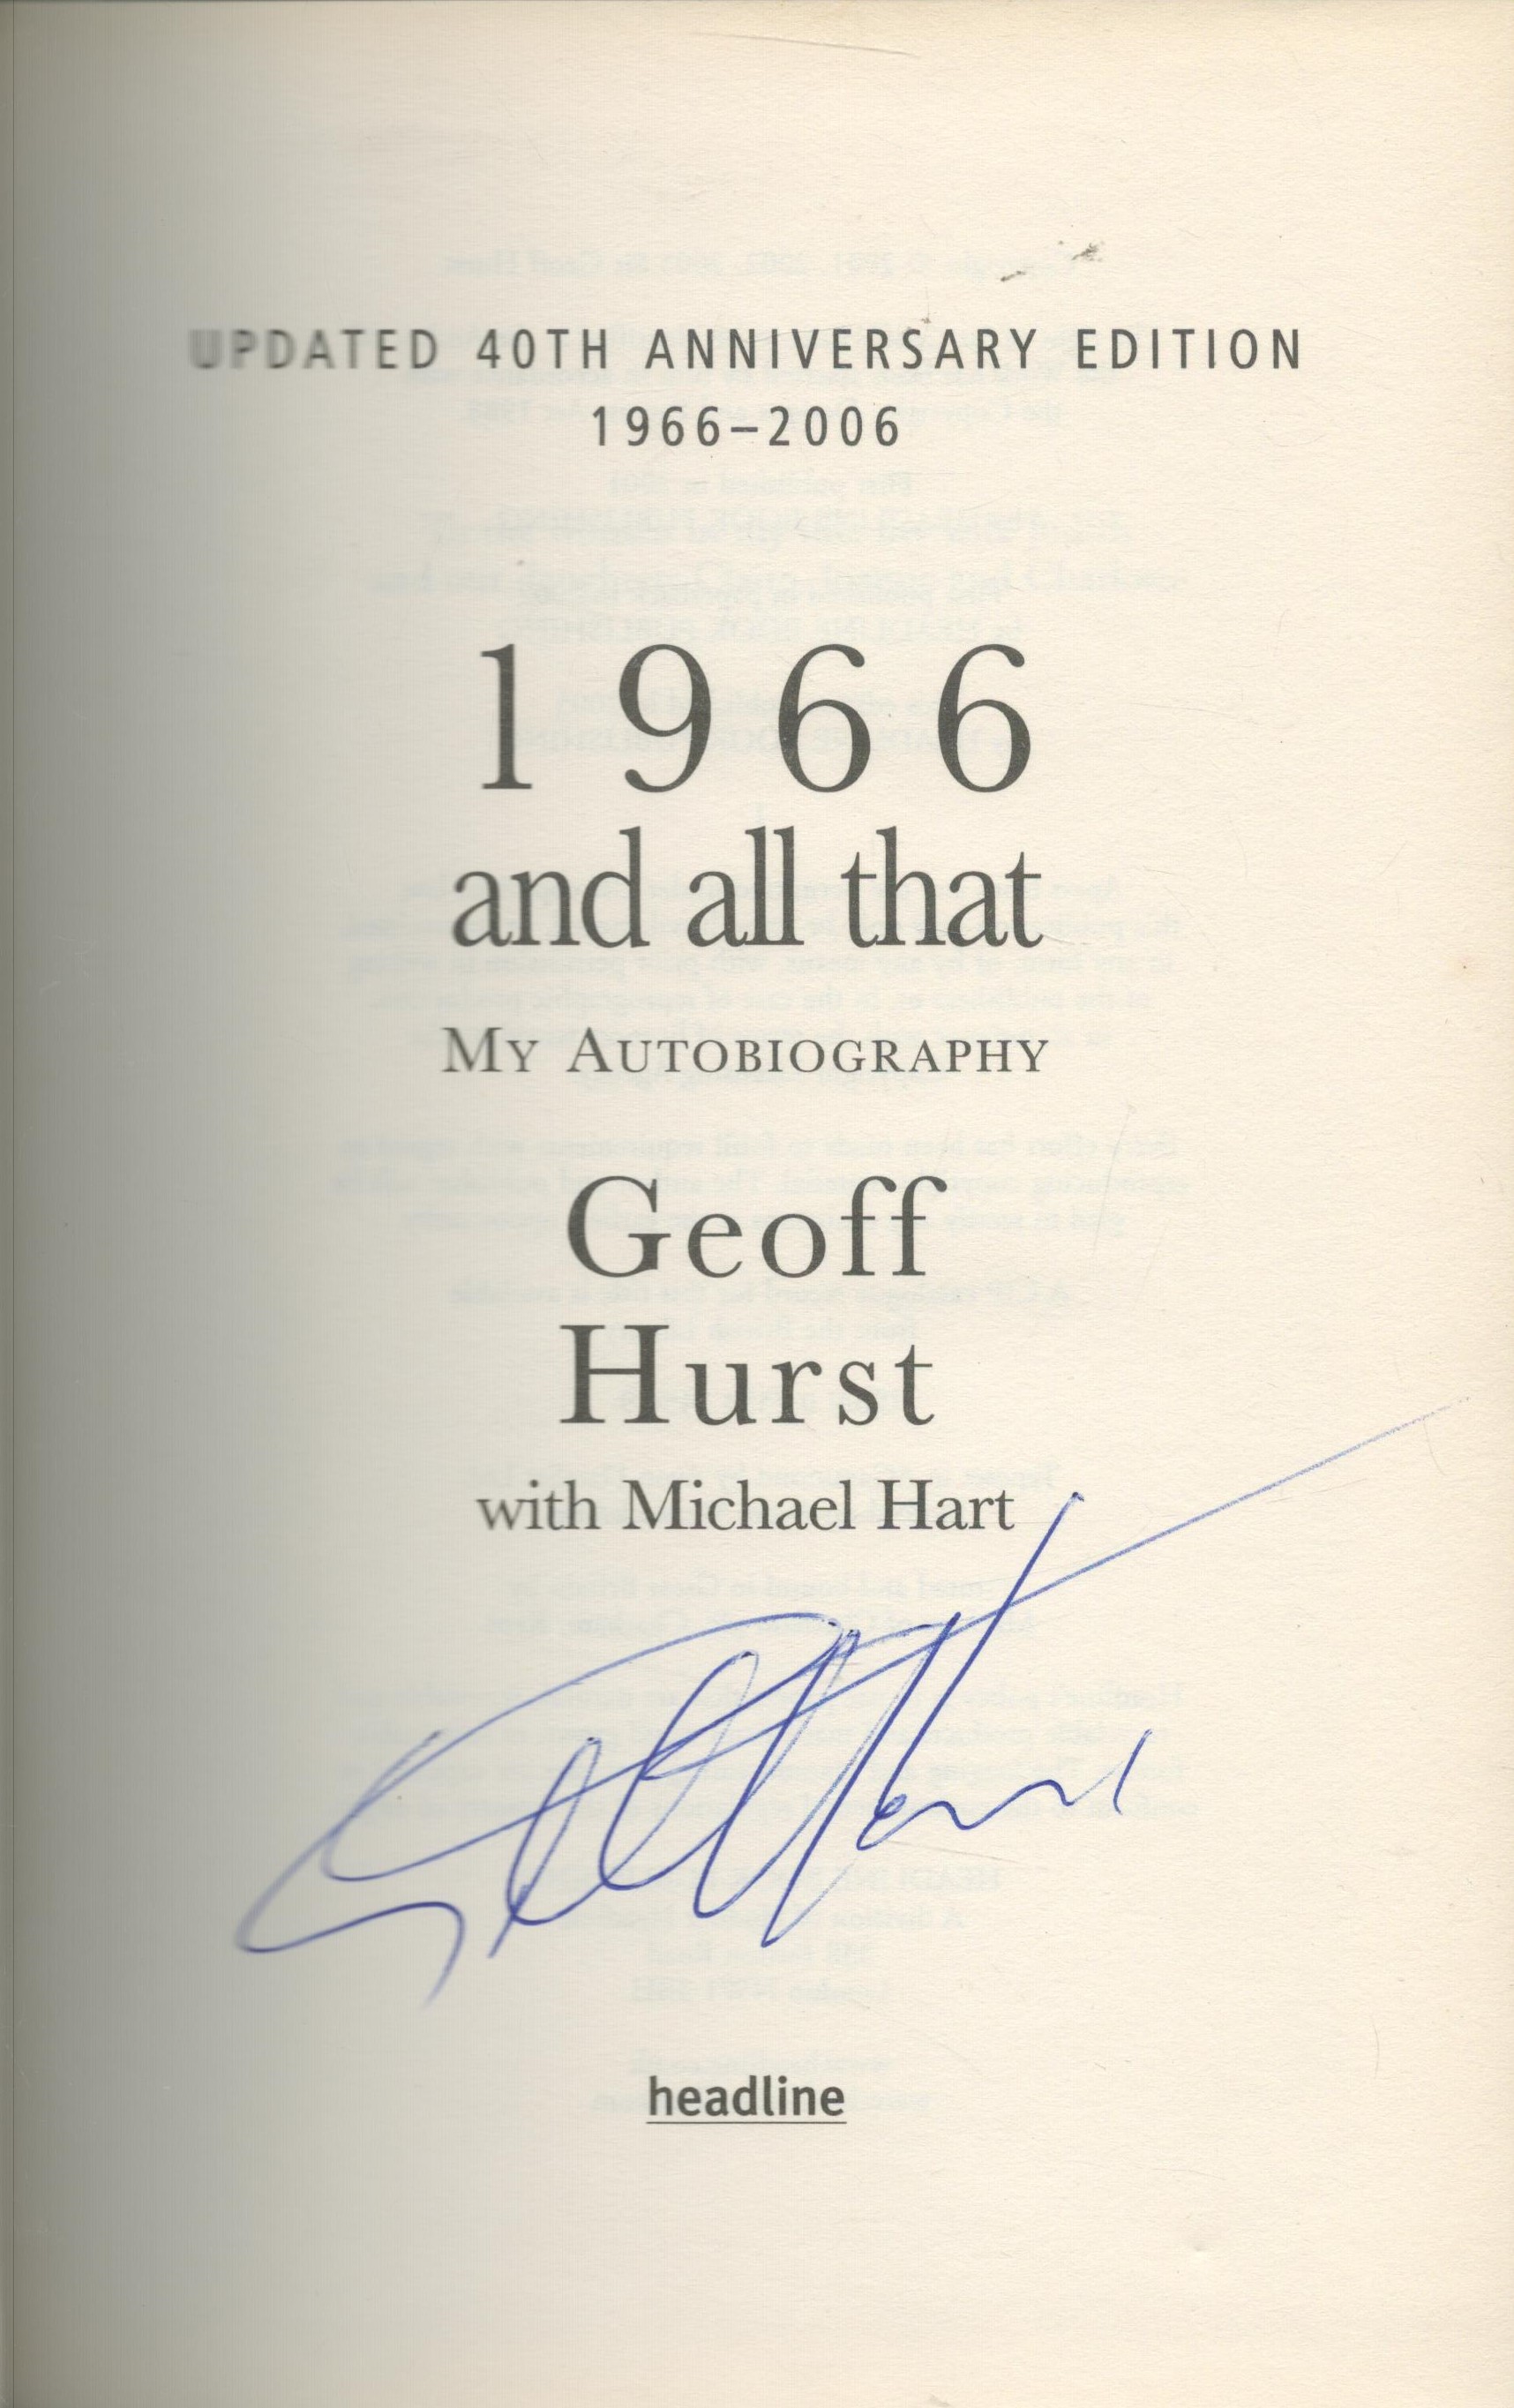 Geoff Hurst signed hardback book titled 1966 and all that updated 40th Anniversary edition 1966-2006 - Image 2 of 3